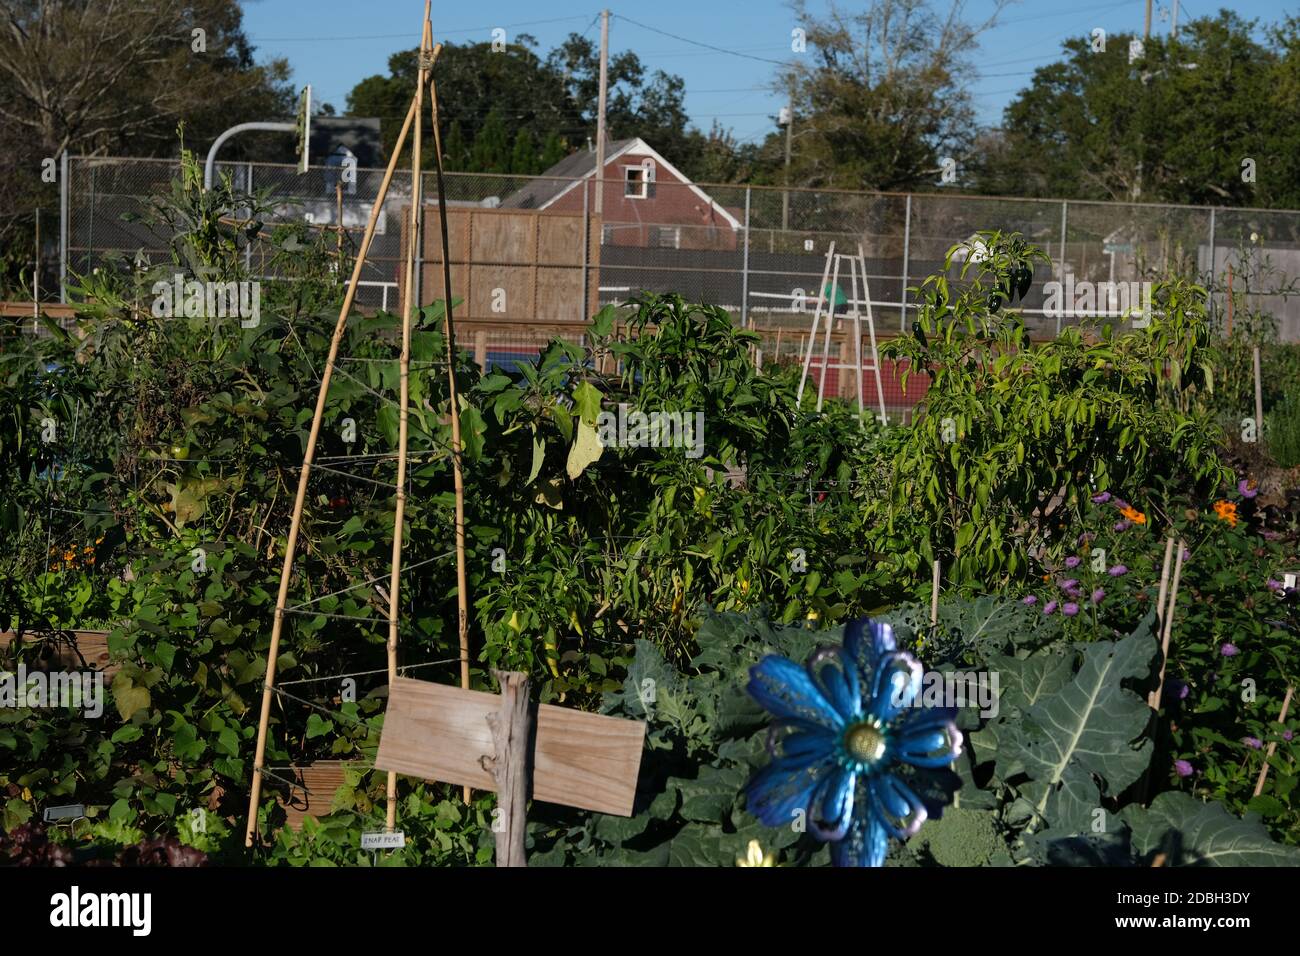 Urban Gardens, Cabbage, Kale, Sign, Chard, Sticks, Tomatoes, Peppers, Blue Fan, Red, Hose, Pot Stock Photo